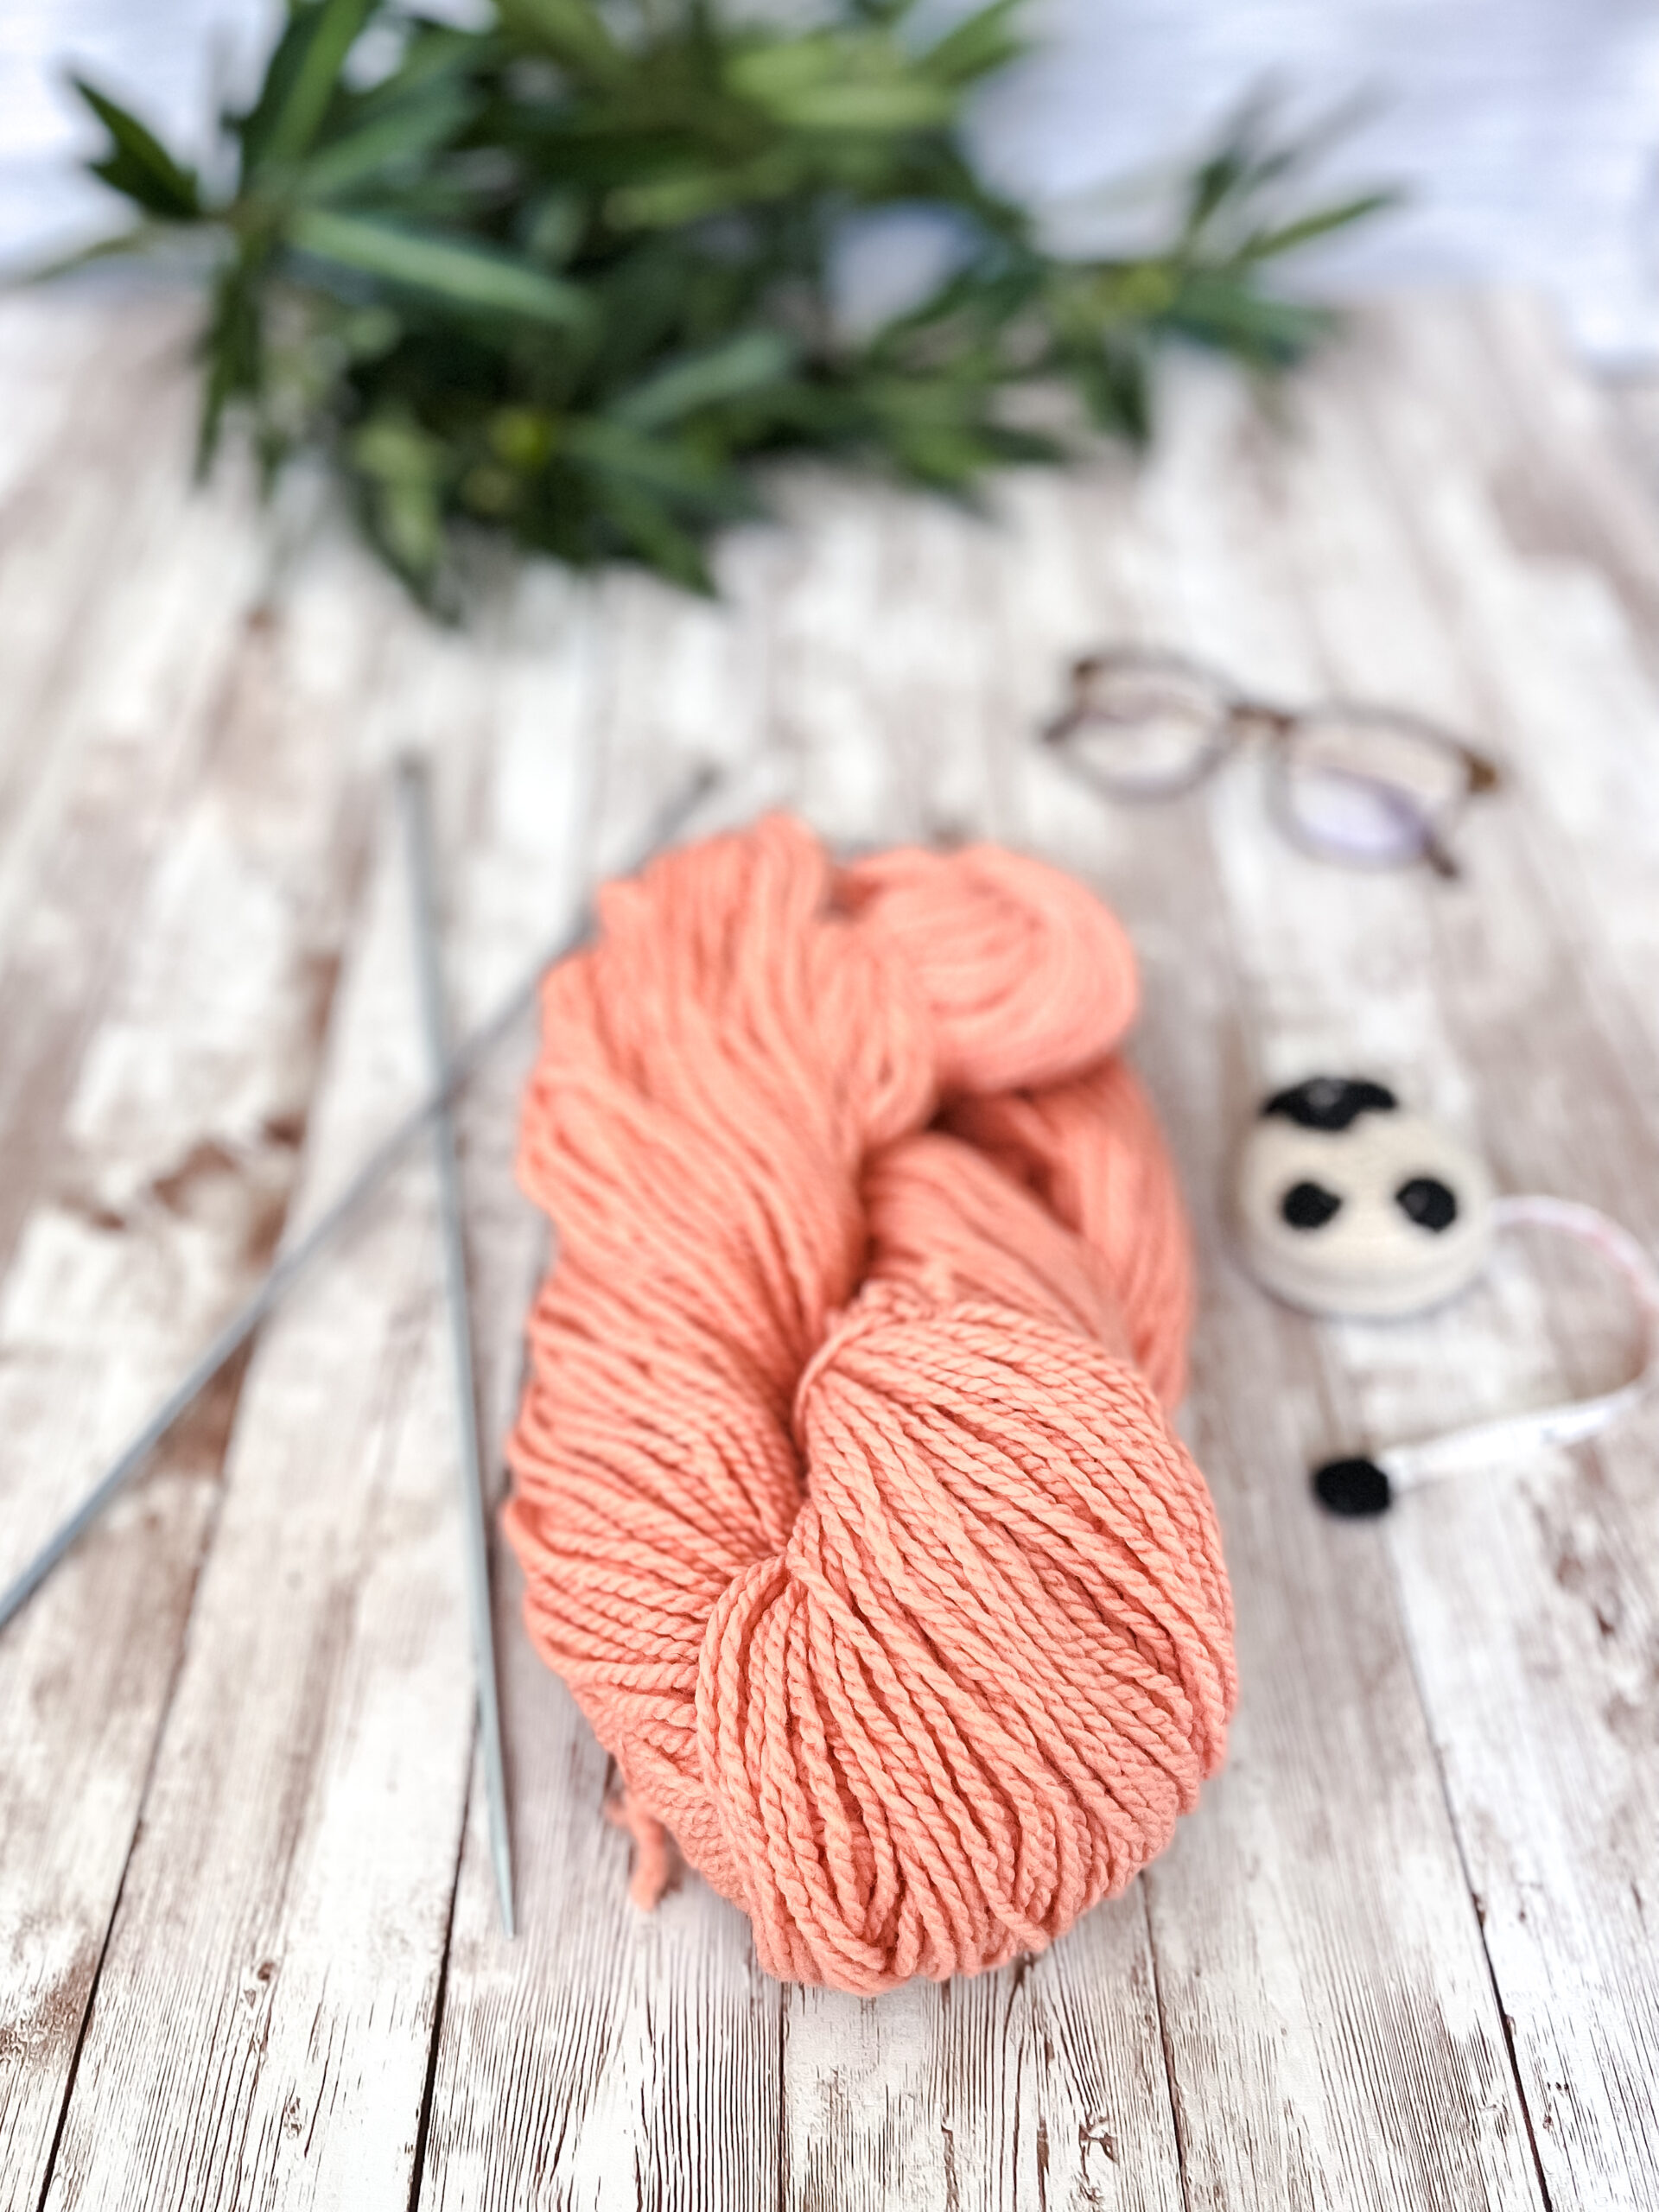 A hank of peach, Virginia farmed fine merino yarn rests on a wood plank, with knitting needles, a sheep measuring tape, a pair of reading glasses, and some greenery around it